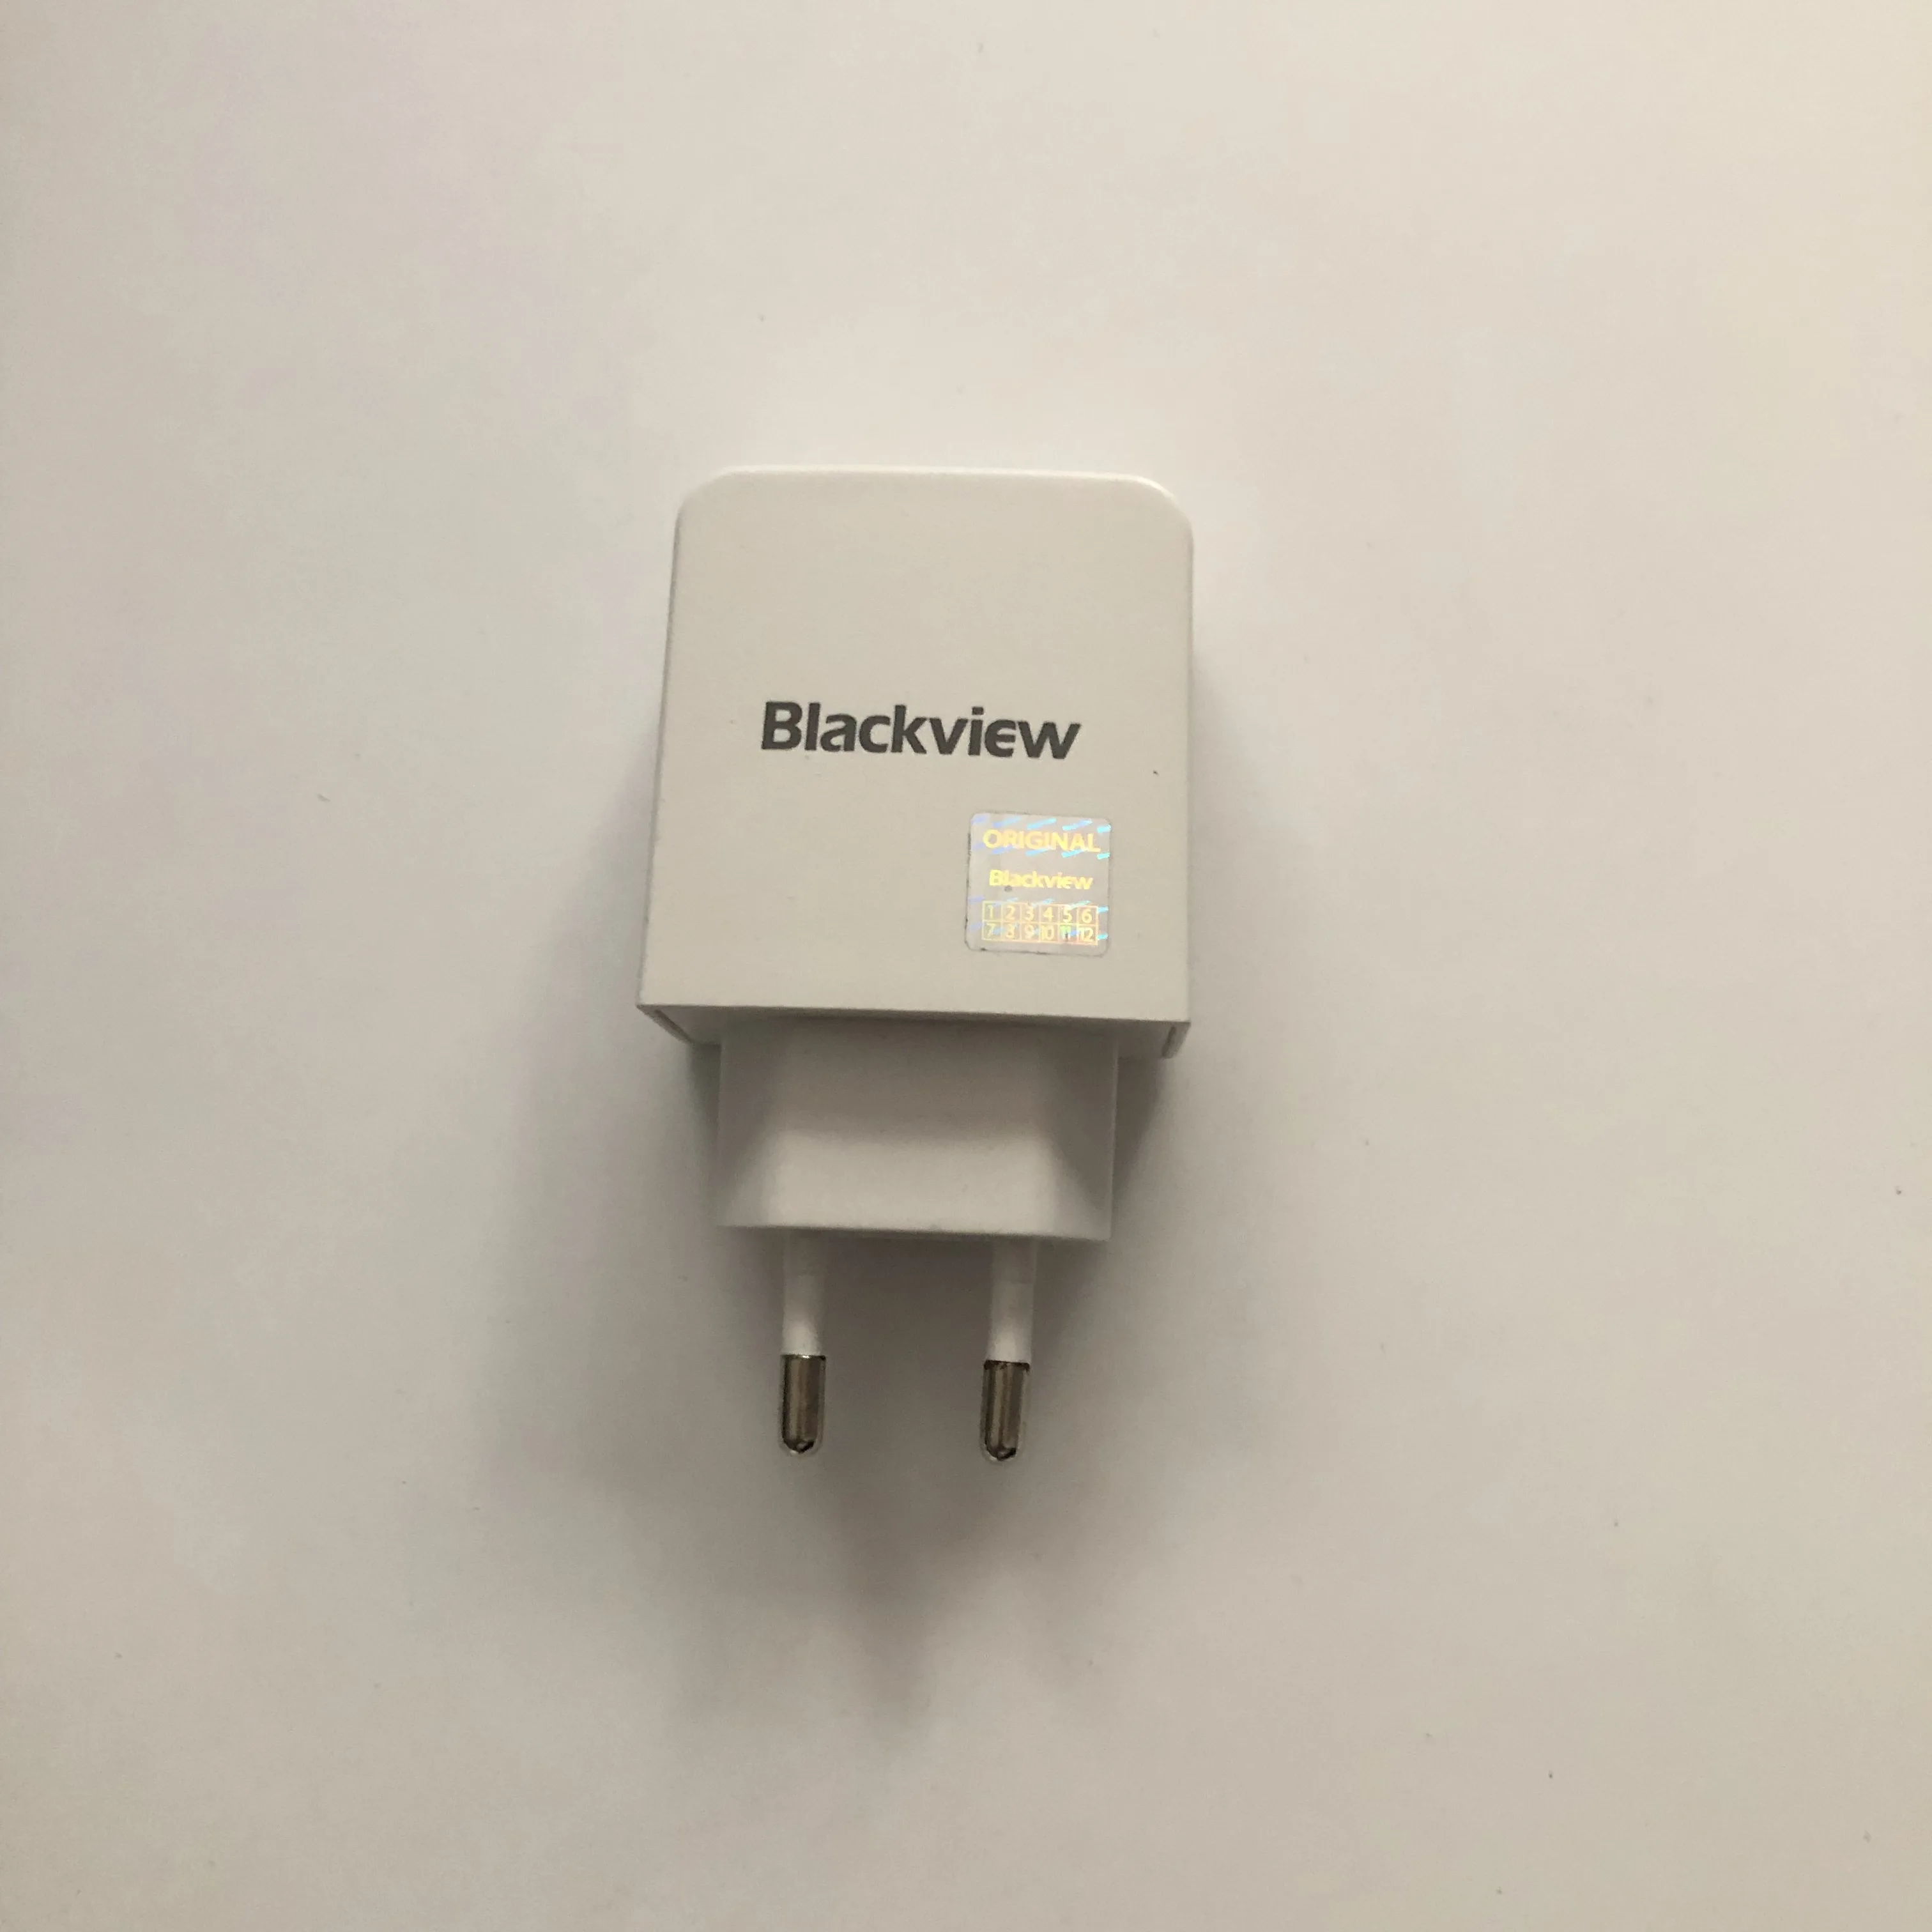 

Blackview BV6000 New Travel Charger + USB Cable USB Line For Blackview BV6000S MTK6735 Quad Core 4.7inch HD 1280*720 Smartphone